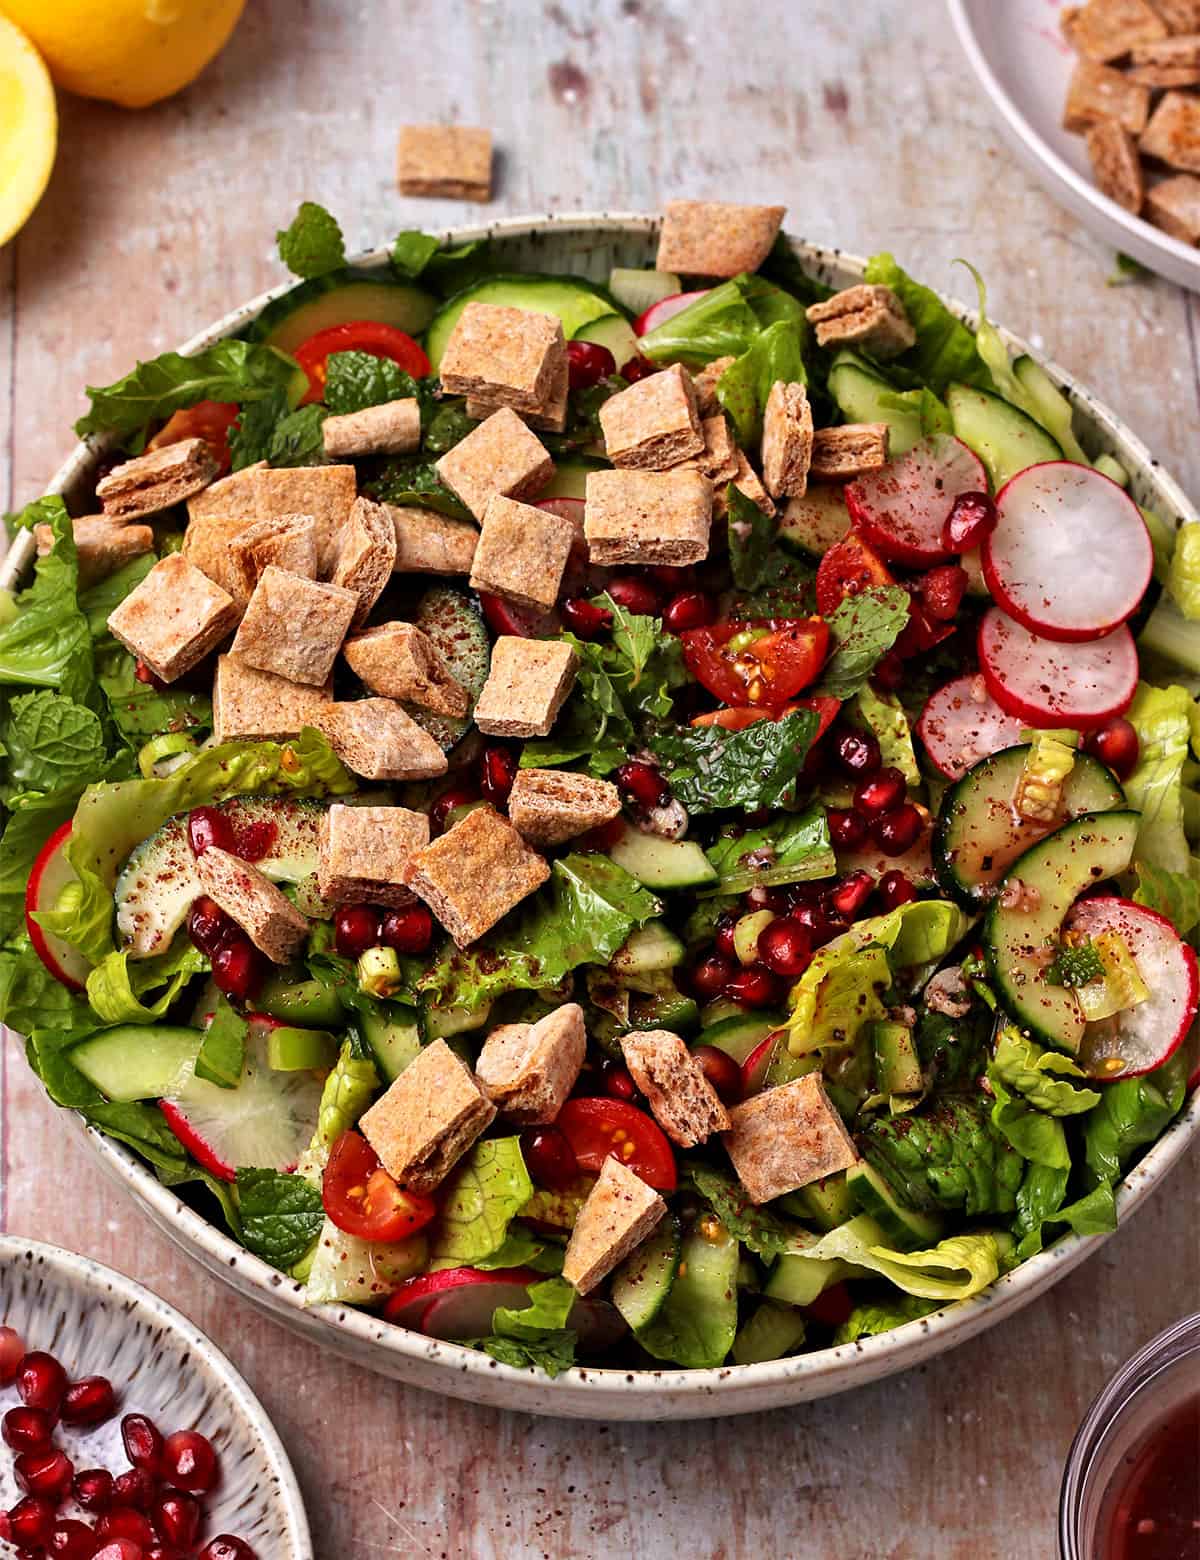 Lebanese Fattoush salad in a bowl with pomegranate seeds.